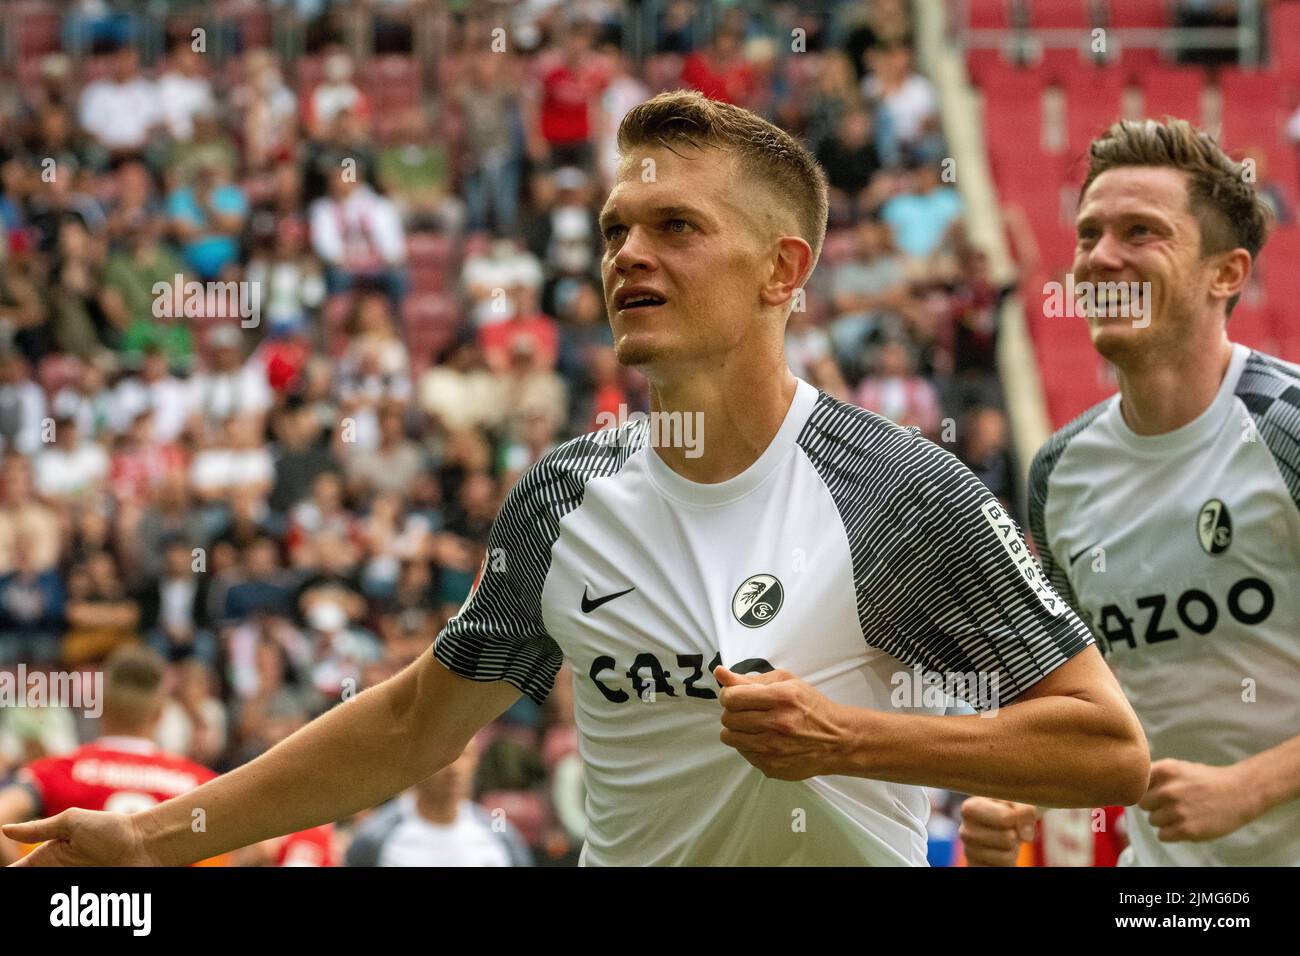 06 August 2022, Bavaria, Augsburg: Soccer, Bundesliga, FC Augsburg - SC Freiburg, Matchday 1, WWK Arena. Freiburg's Matthias Ginter celebrates his goal for 0:3 next to Freiburg's Michael Gregoritsch. Photo: Stefan Puchner/dpa - IMPORTANT NOTE: In accordance with the requirements of the DFL Deutsche Fußball Liga and the DFB Deutscher Fußball-Bund, it is prohibited to use or have used photographs taken in the stadium and/or of the match in the form of sequence pictures and/or video-like photo series. Stock Photo